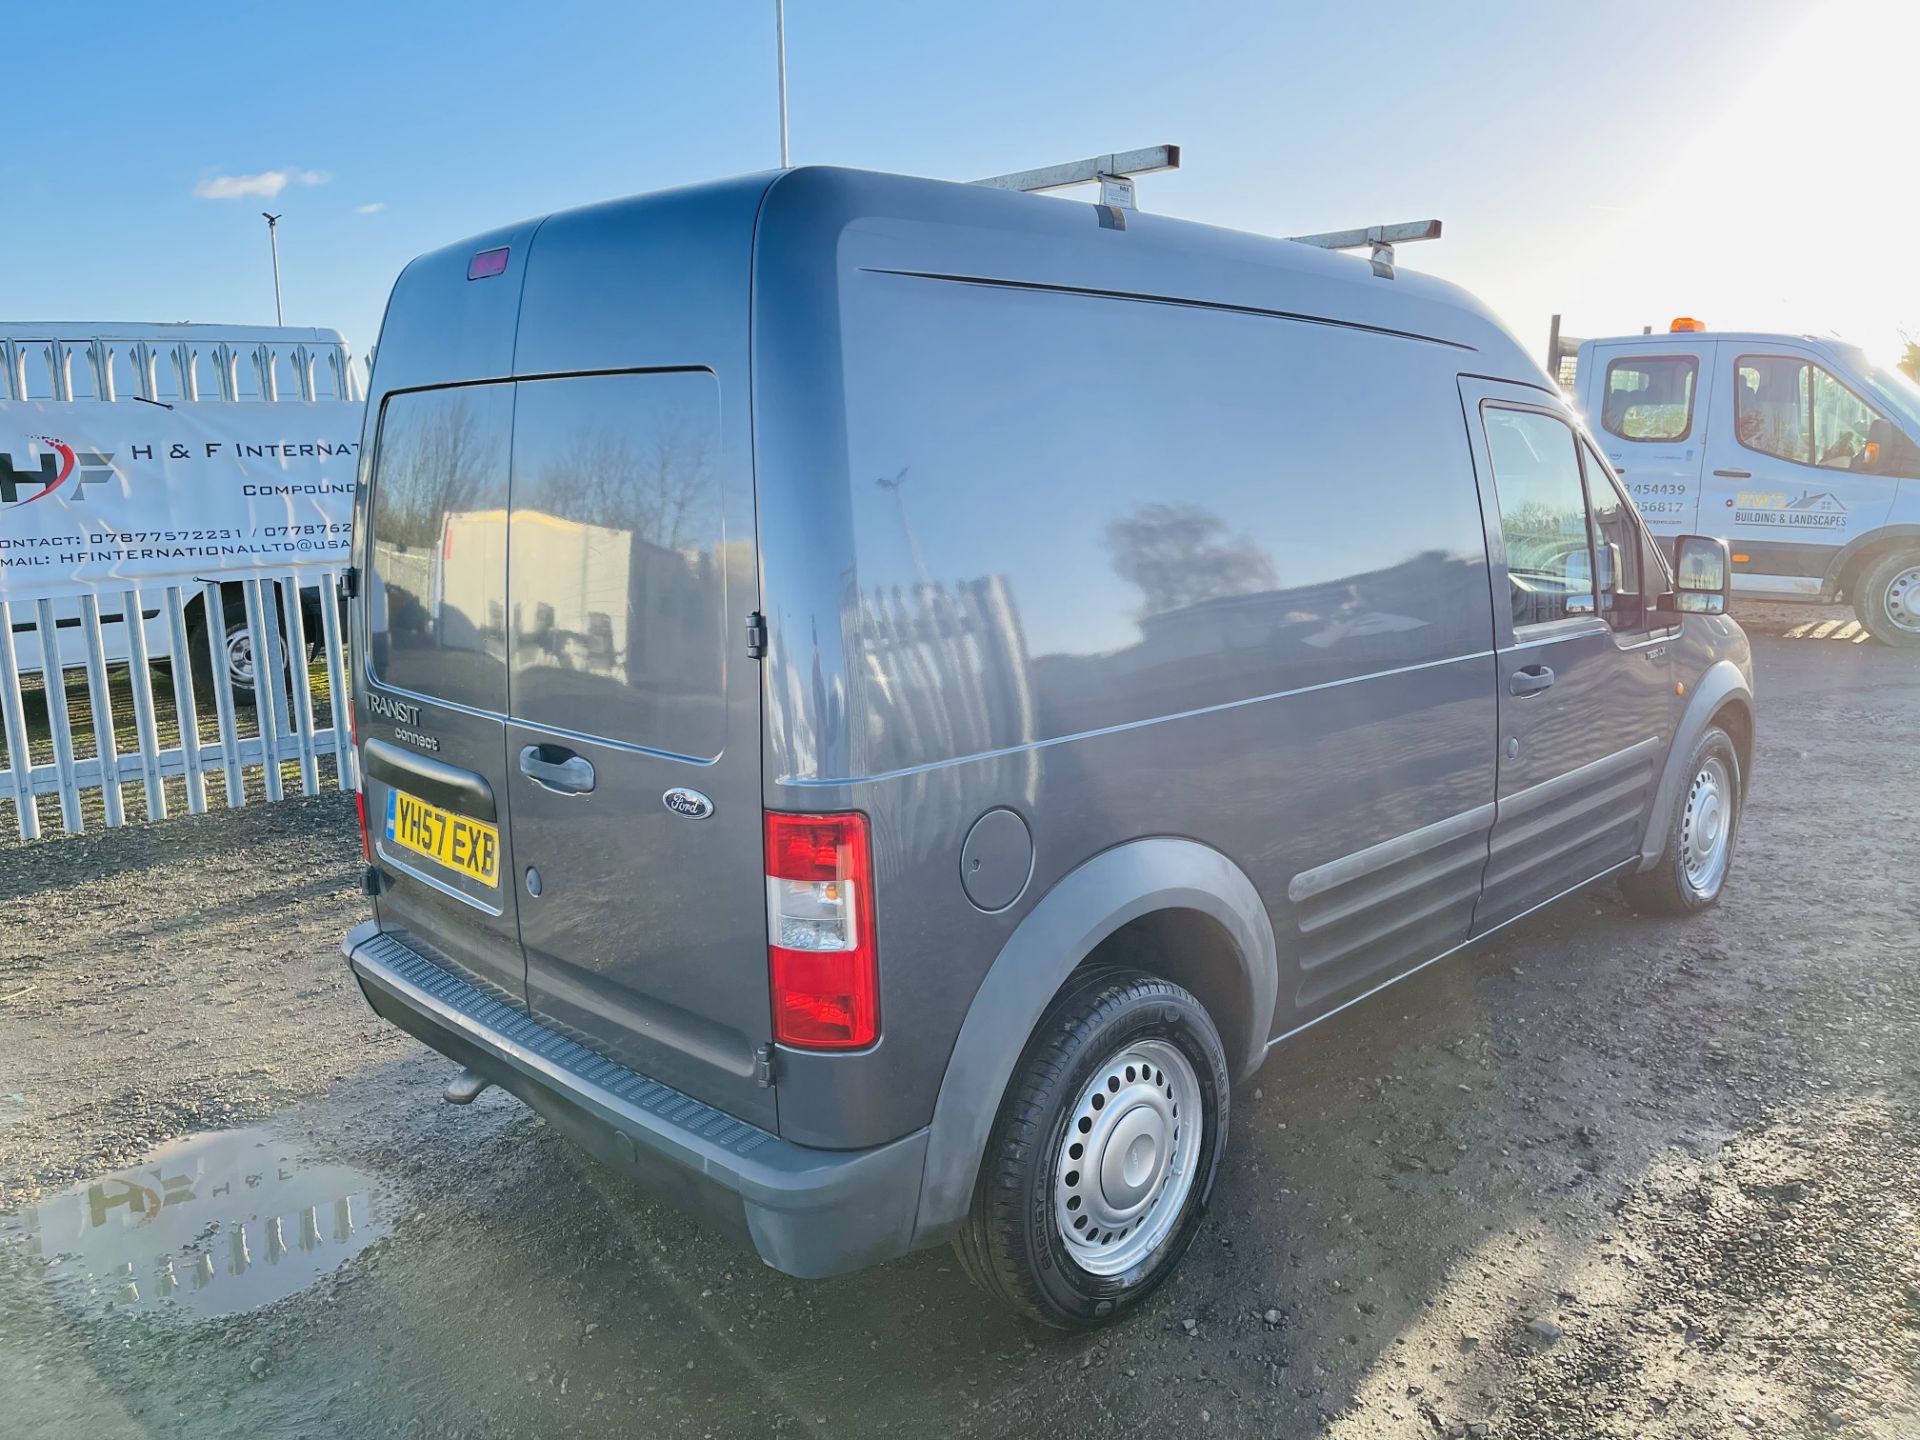 Ford Transit Connect 1.8 TDCI T230 LX110 LWB High Roof 2007 '57 Reg' A/C - No vat save 20% - Image 14 of 20